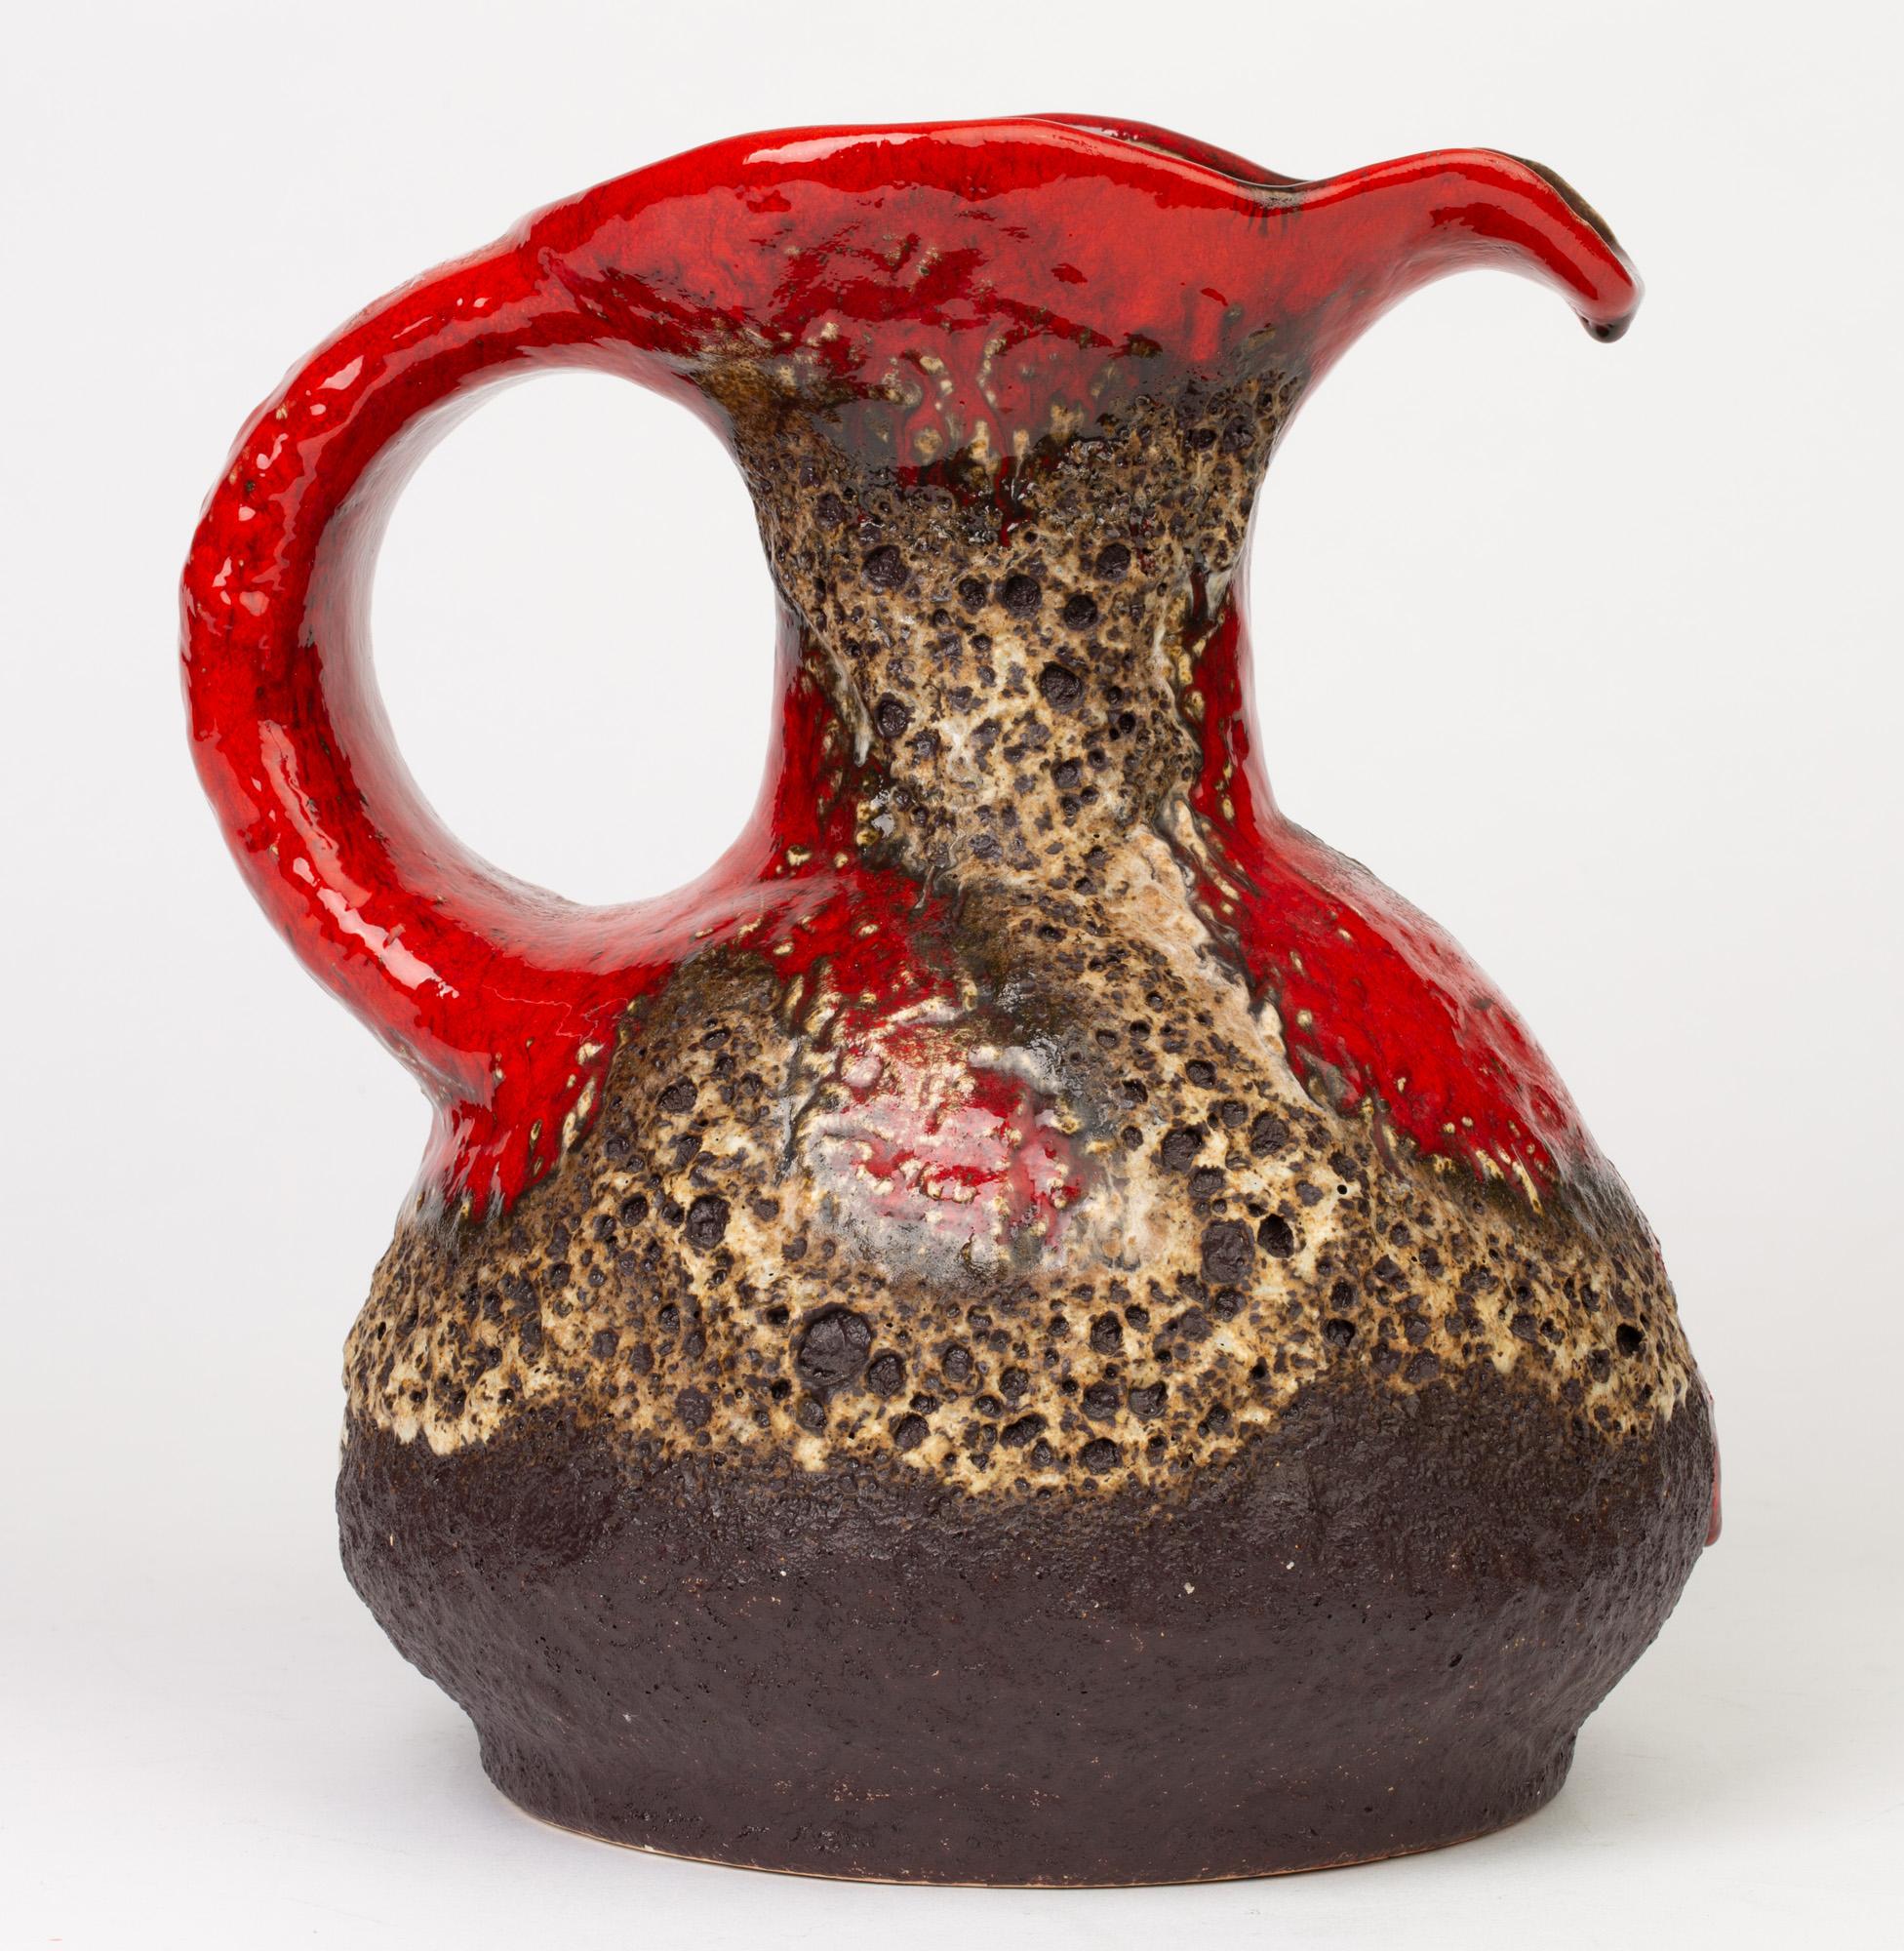 A stunning and large German midcentury art pottery jug decorated in lava glazes by Dümler & Breiden and dating from circa 1950-1960. The large heavily made jug has a wide squat bulbous shaped body with narrow funnel shaped neck and large opening